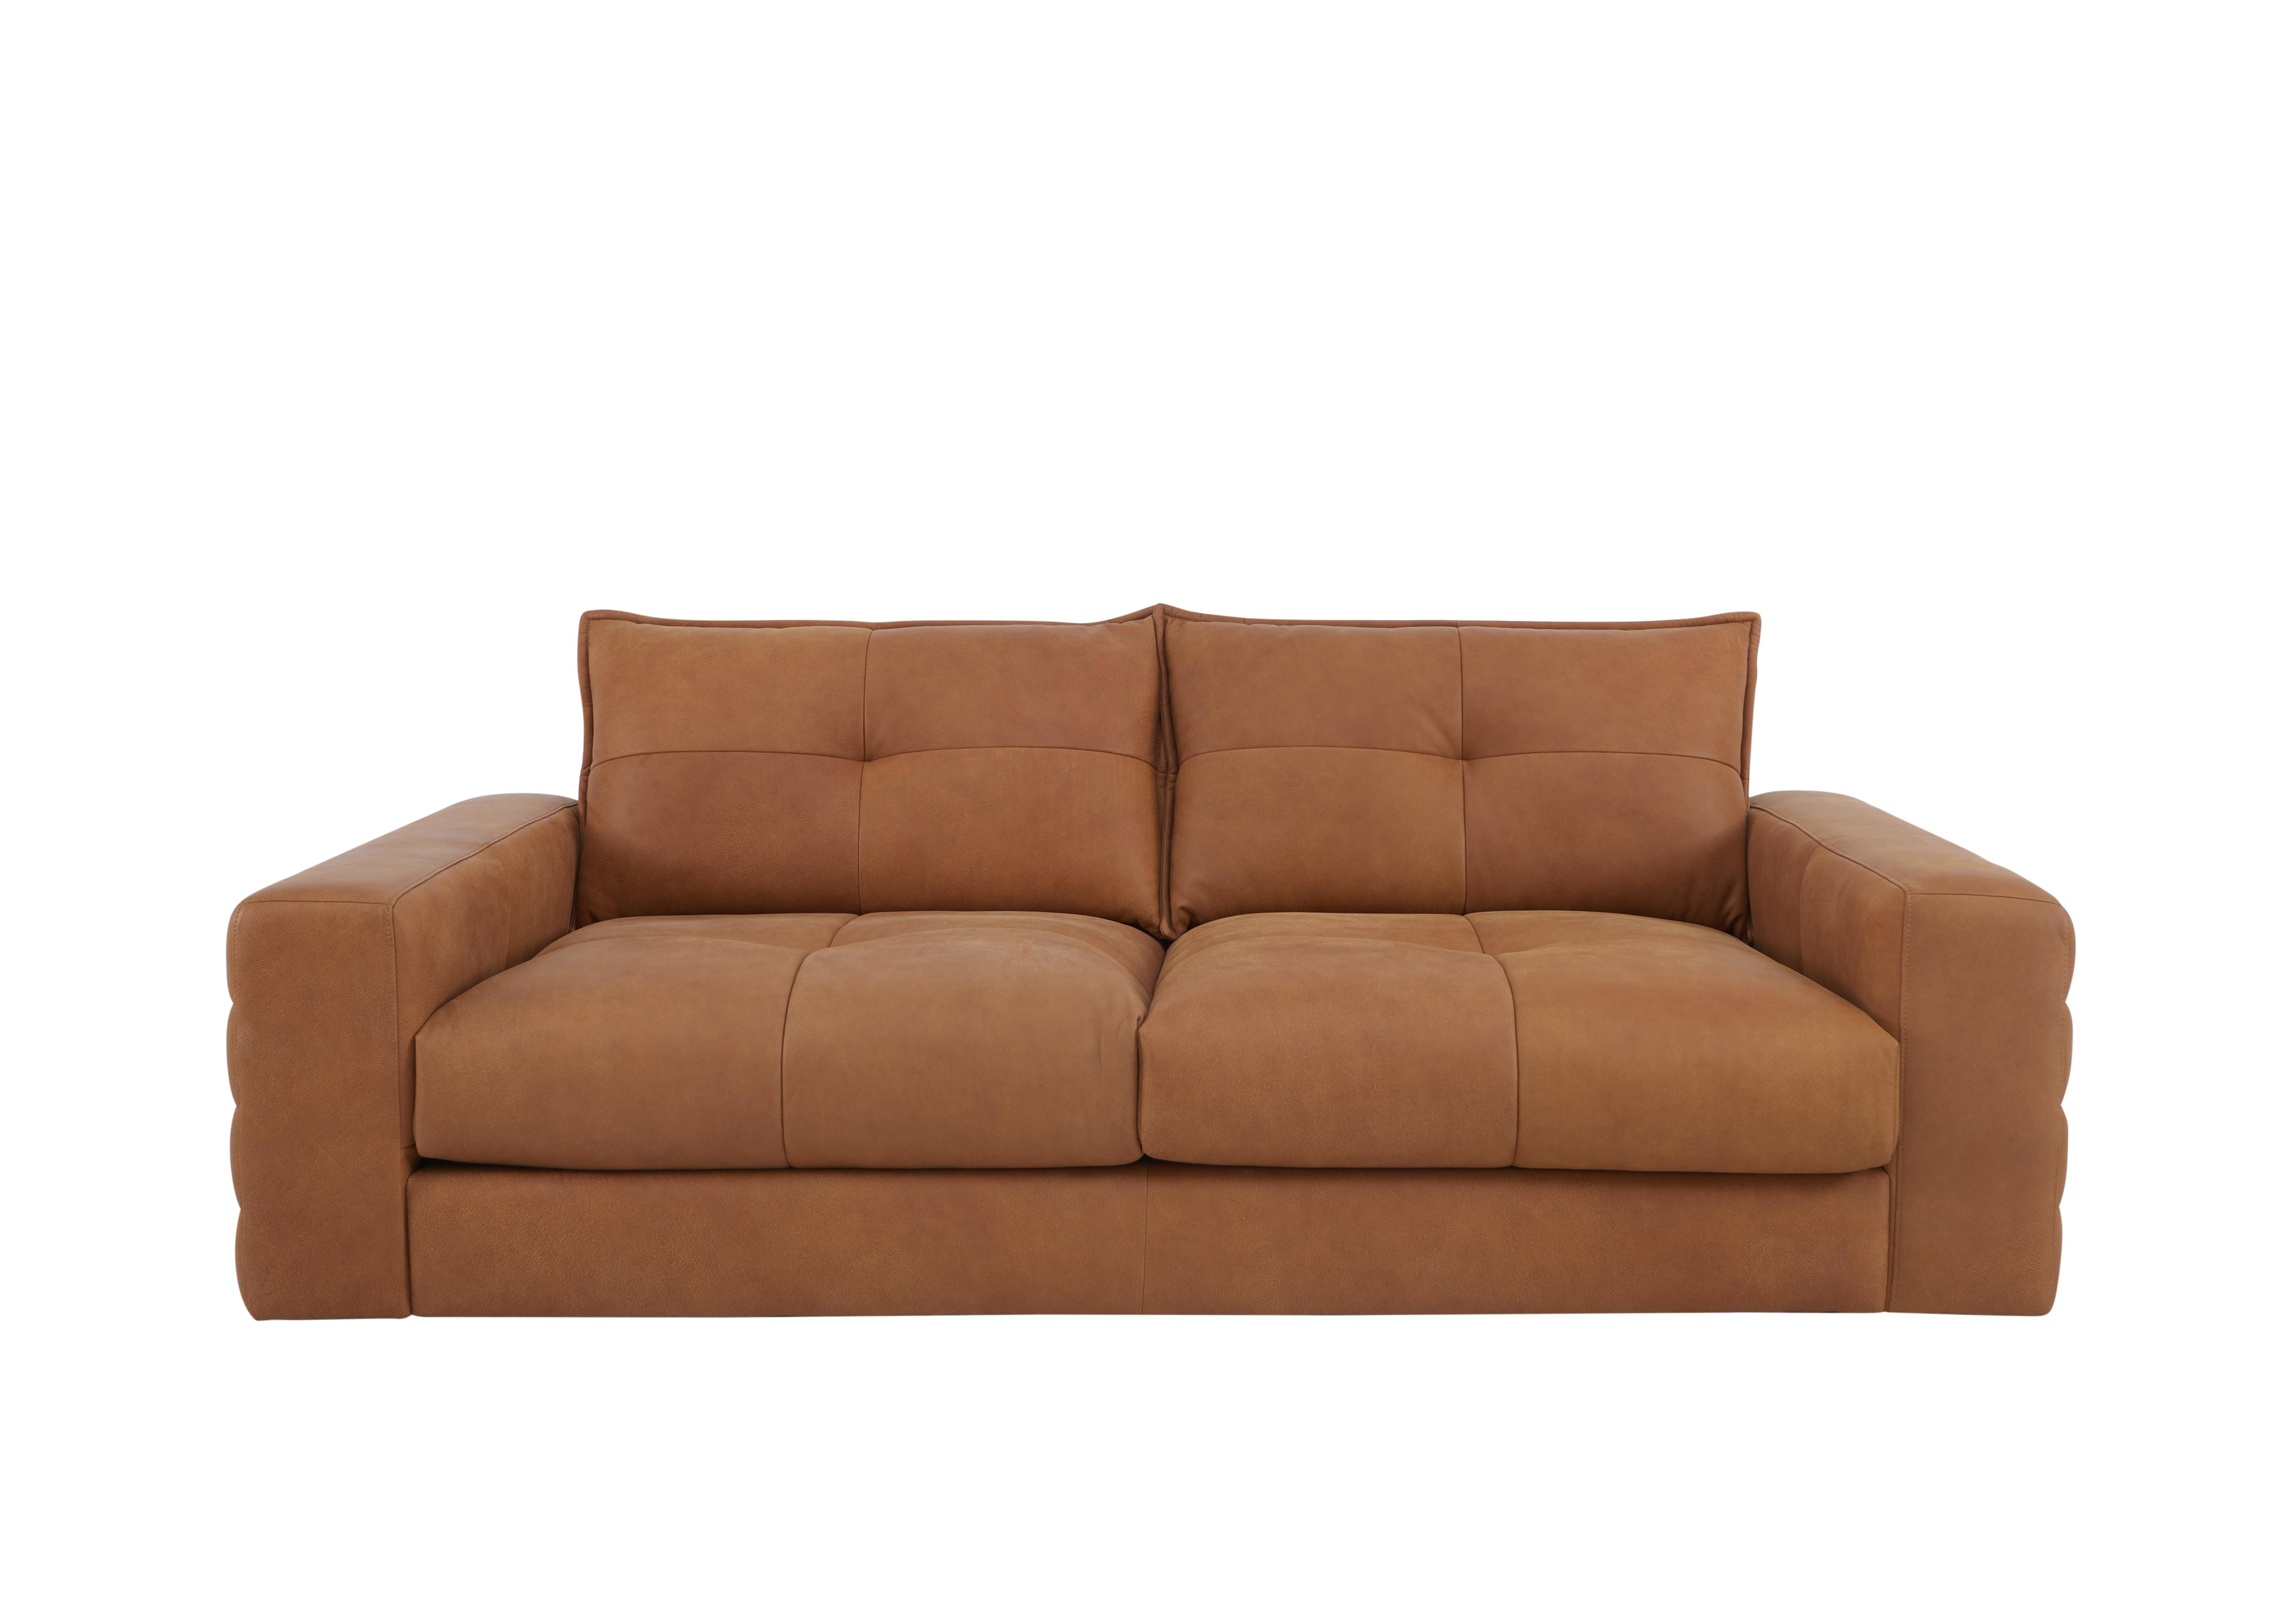 Boutique Brando 3 Seater Leather Sofa in Stone Washed Tan on Furniture Village